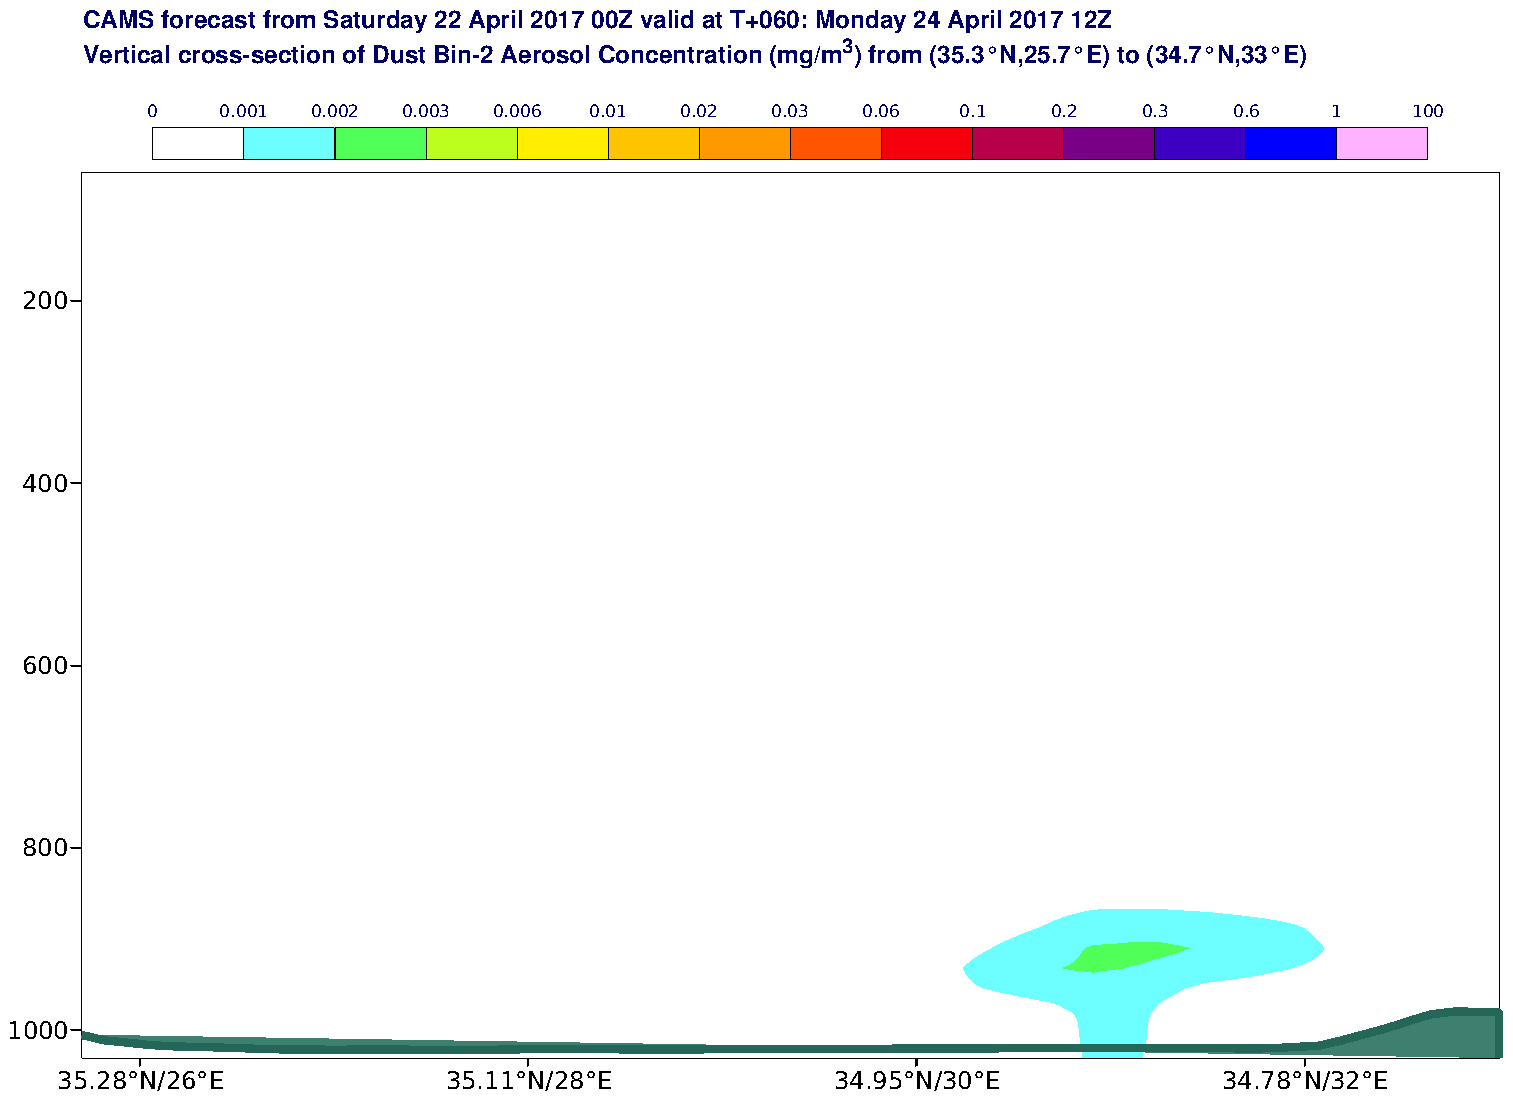 Vertical cross-section of Dust Bin-2 Aerosol Concentration (mg/m3) valid at T60 - 2017-04-24 12:00